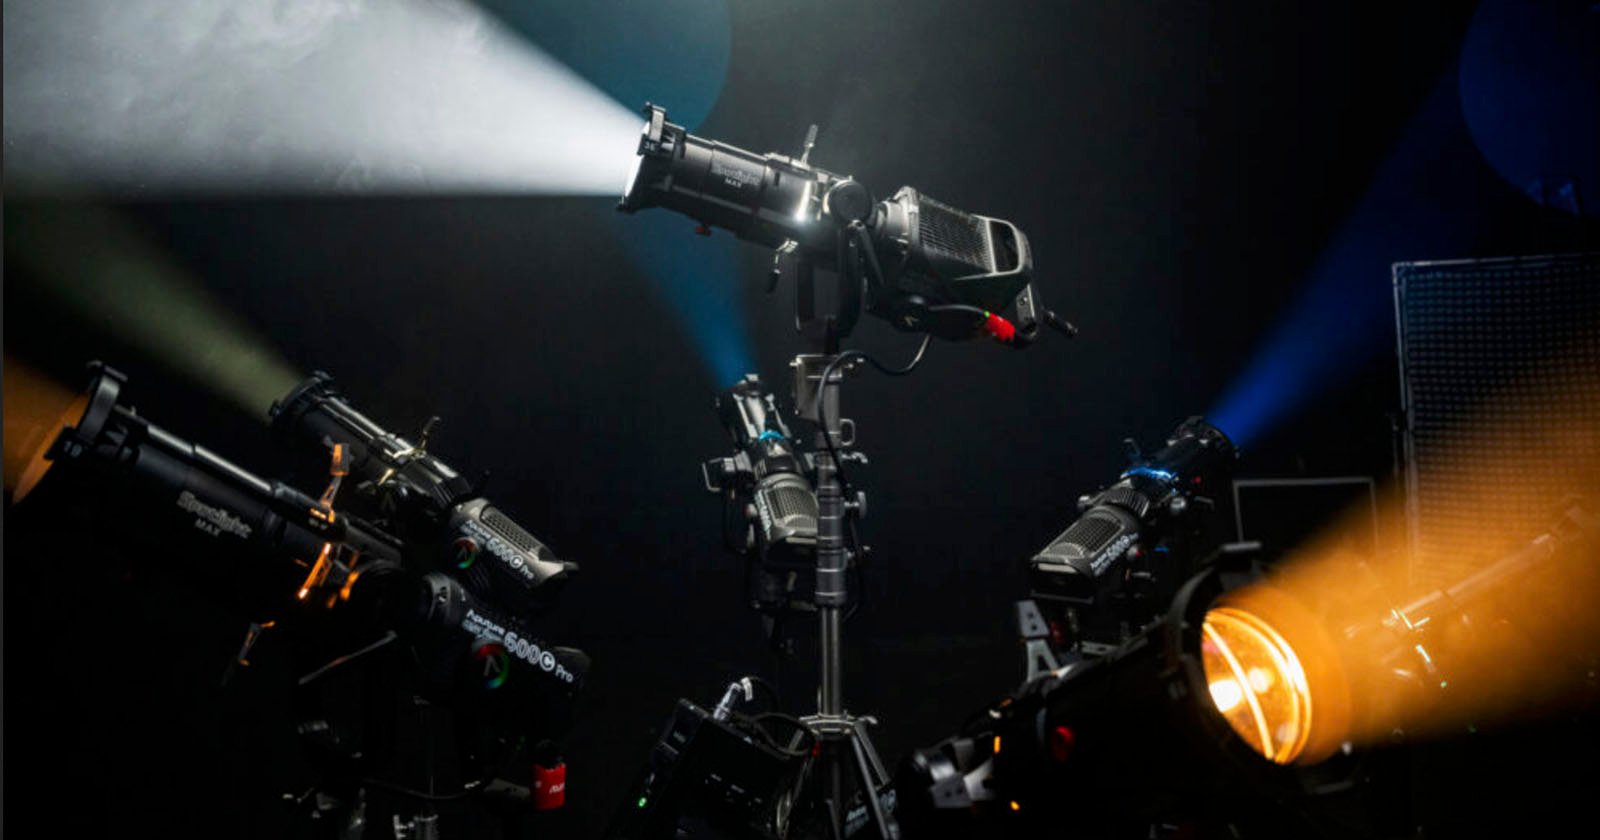 Aputures Spotlight Max Projection Lens is a Light Shaper for Pros